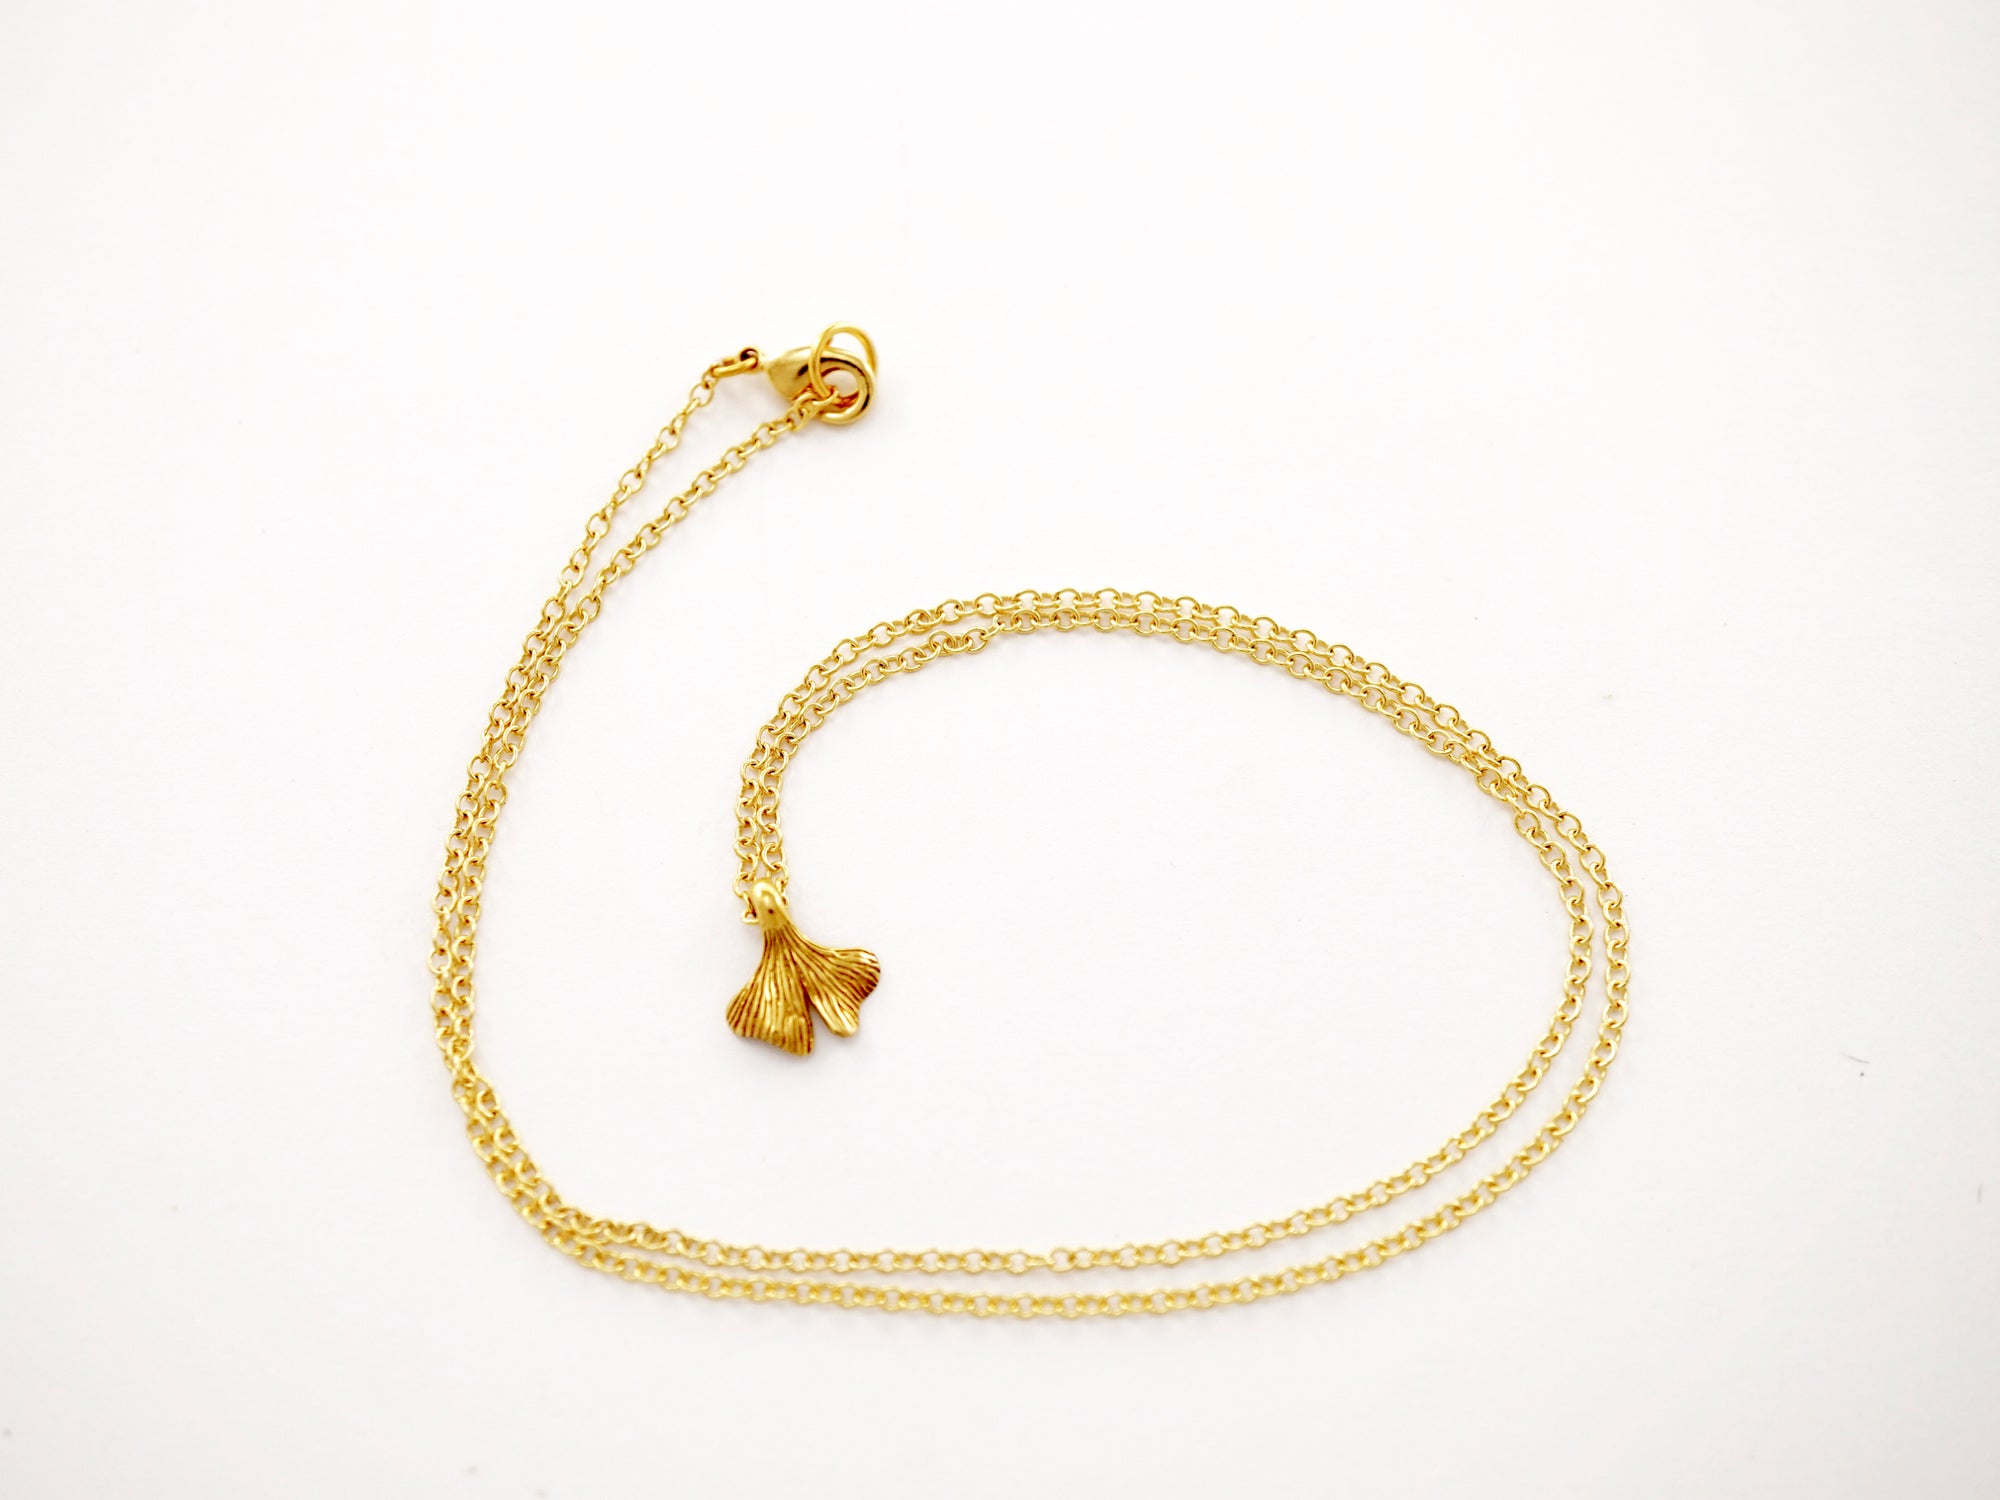 Ginkgo Necklace - Leaf pendant - Gold Filled delicate chain (B230)